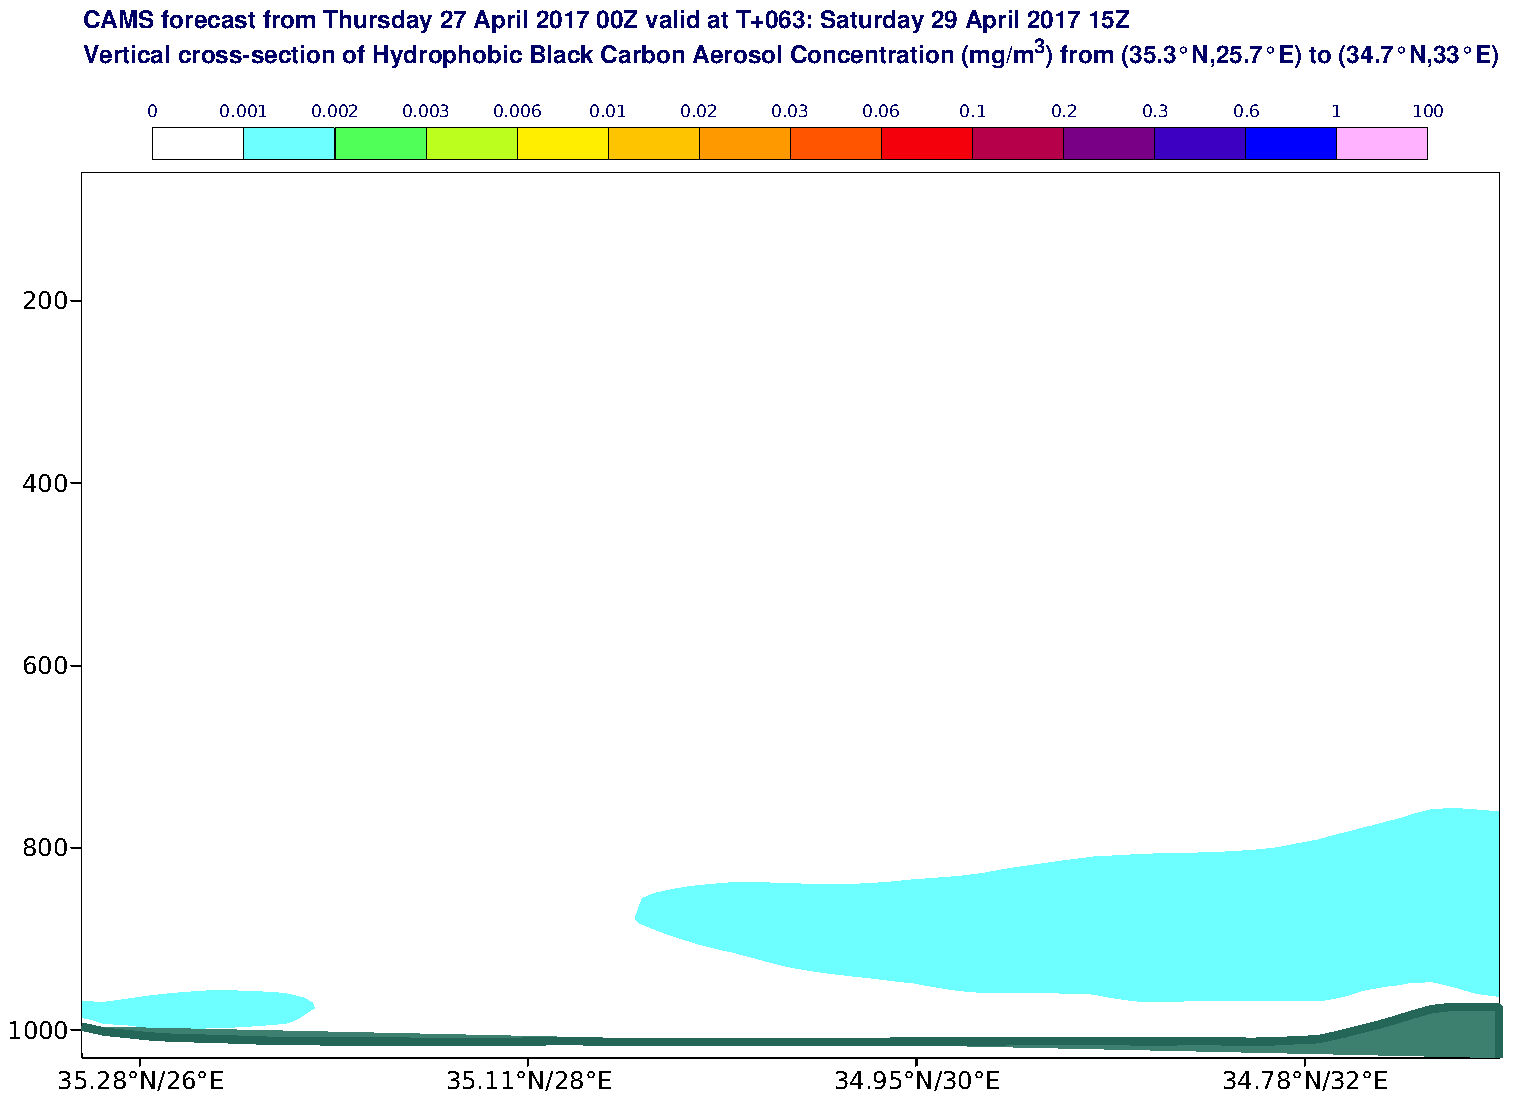 Vertical cross-section of Hydrophobic Black Carbon Aerosol Concentration (mg/m3) valid at T63 - 2017-04-29 15:00